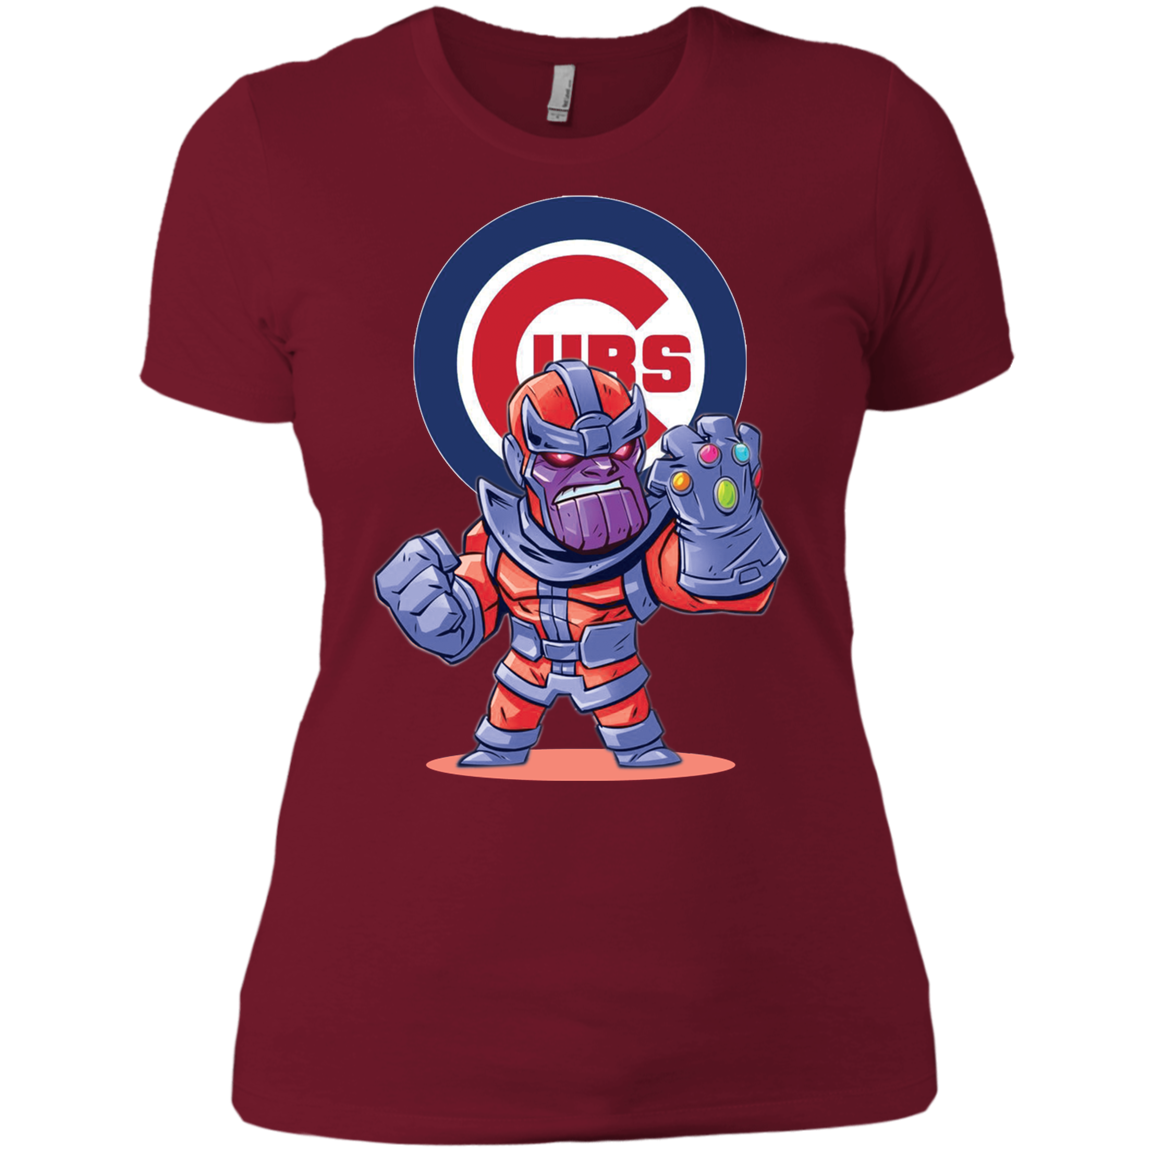 Shirt For Thanos And Chicago Cubs Fans Shirts